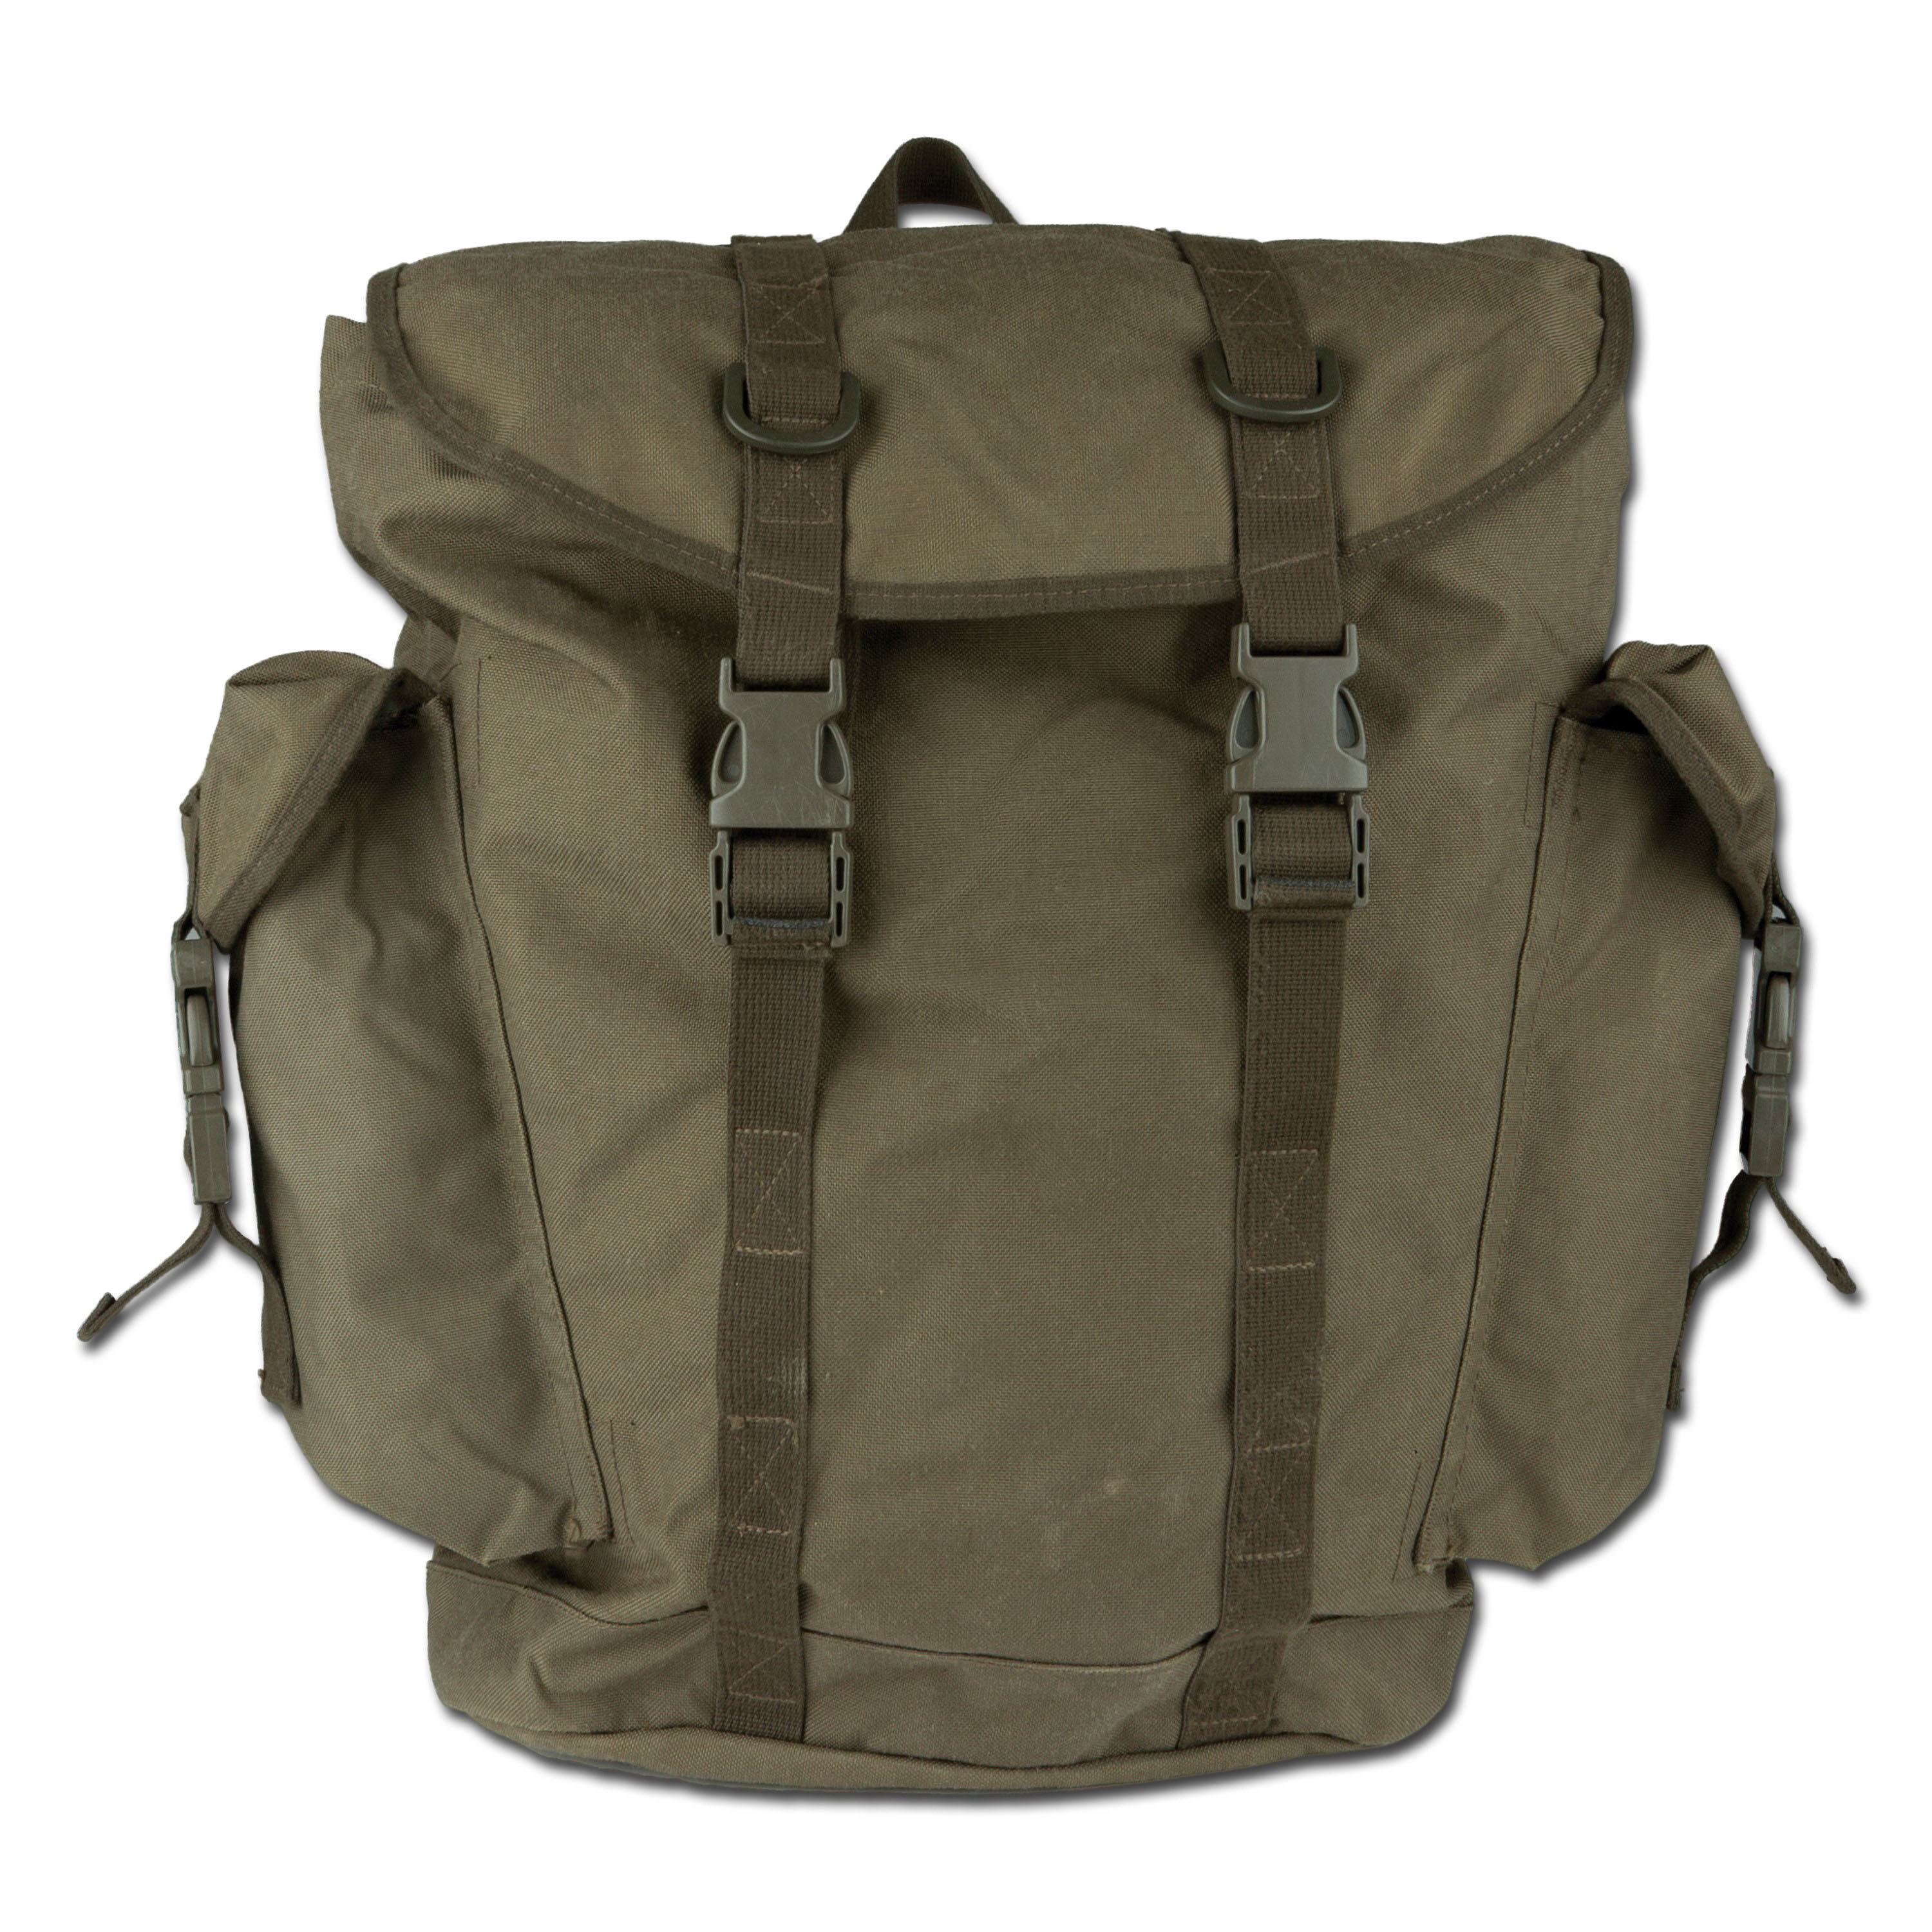 Prchase the German Infantry Backpack Used olive drab by ASMC